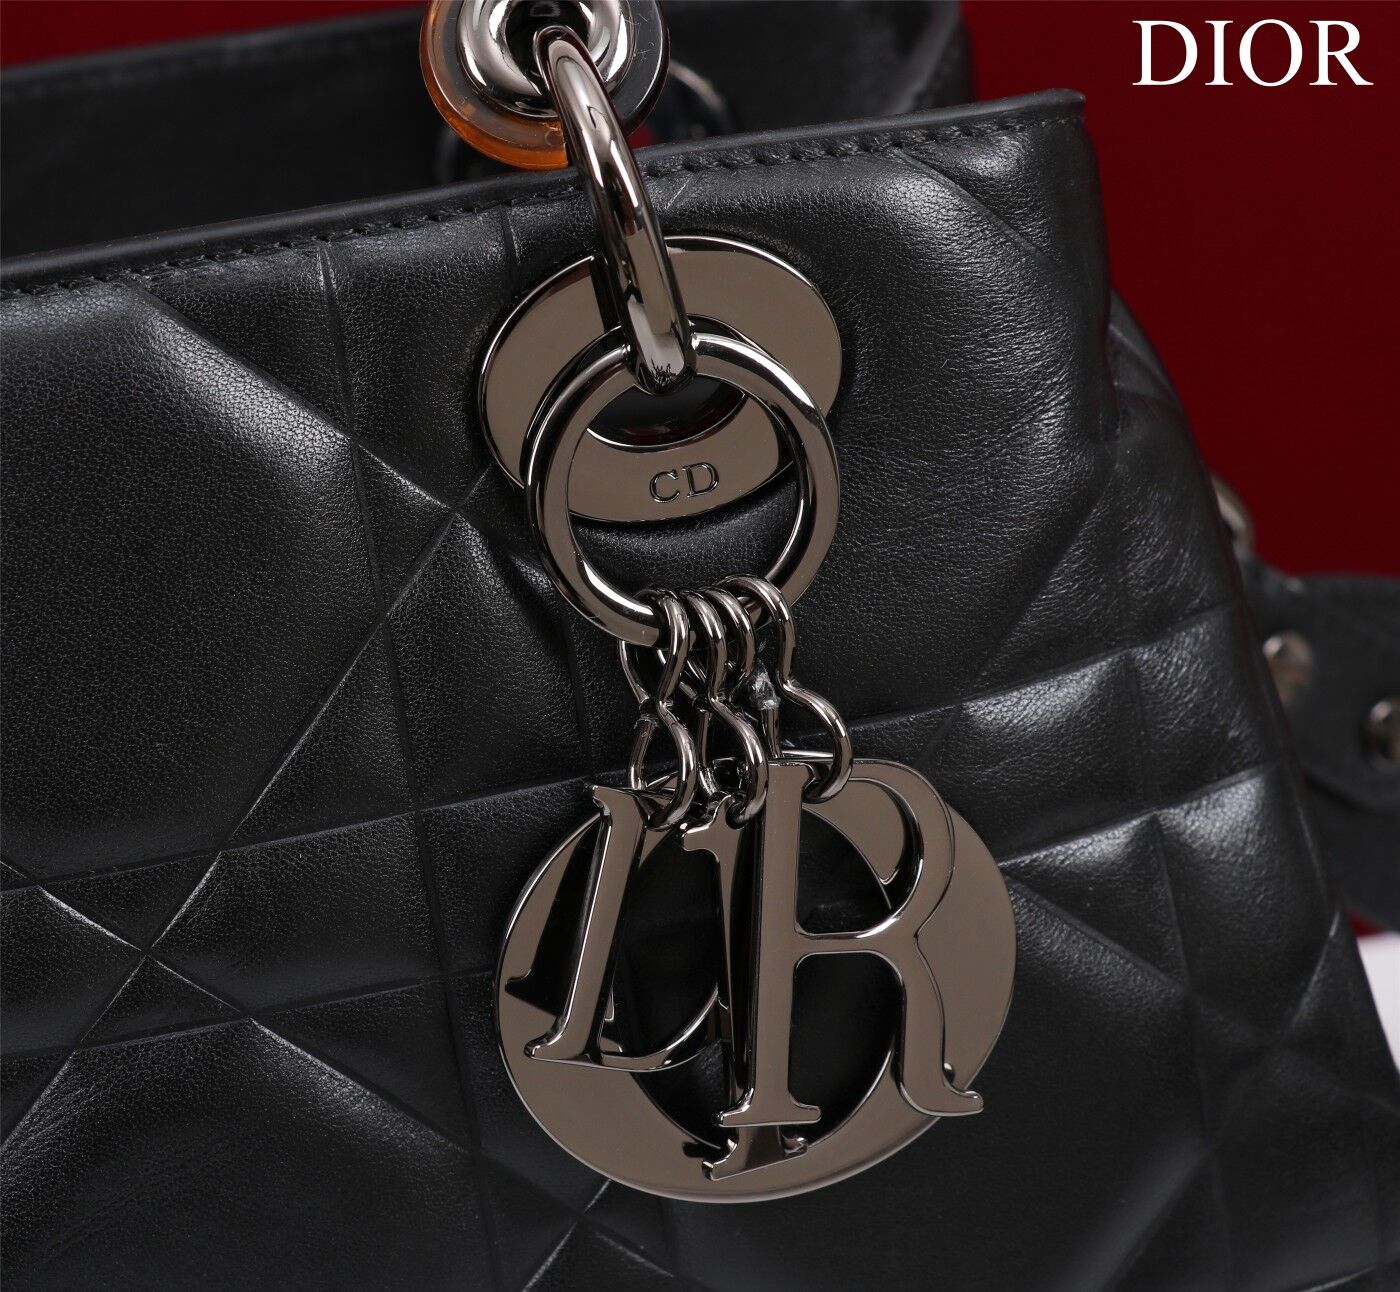 LADY DIOR TOP HANDLE SMALL BAG Latte Cannage Lambskin C0963 BLACK